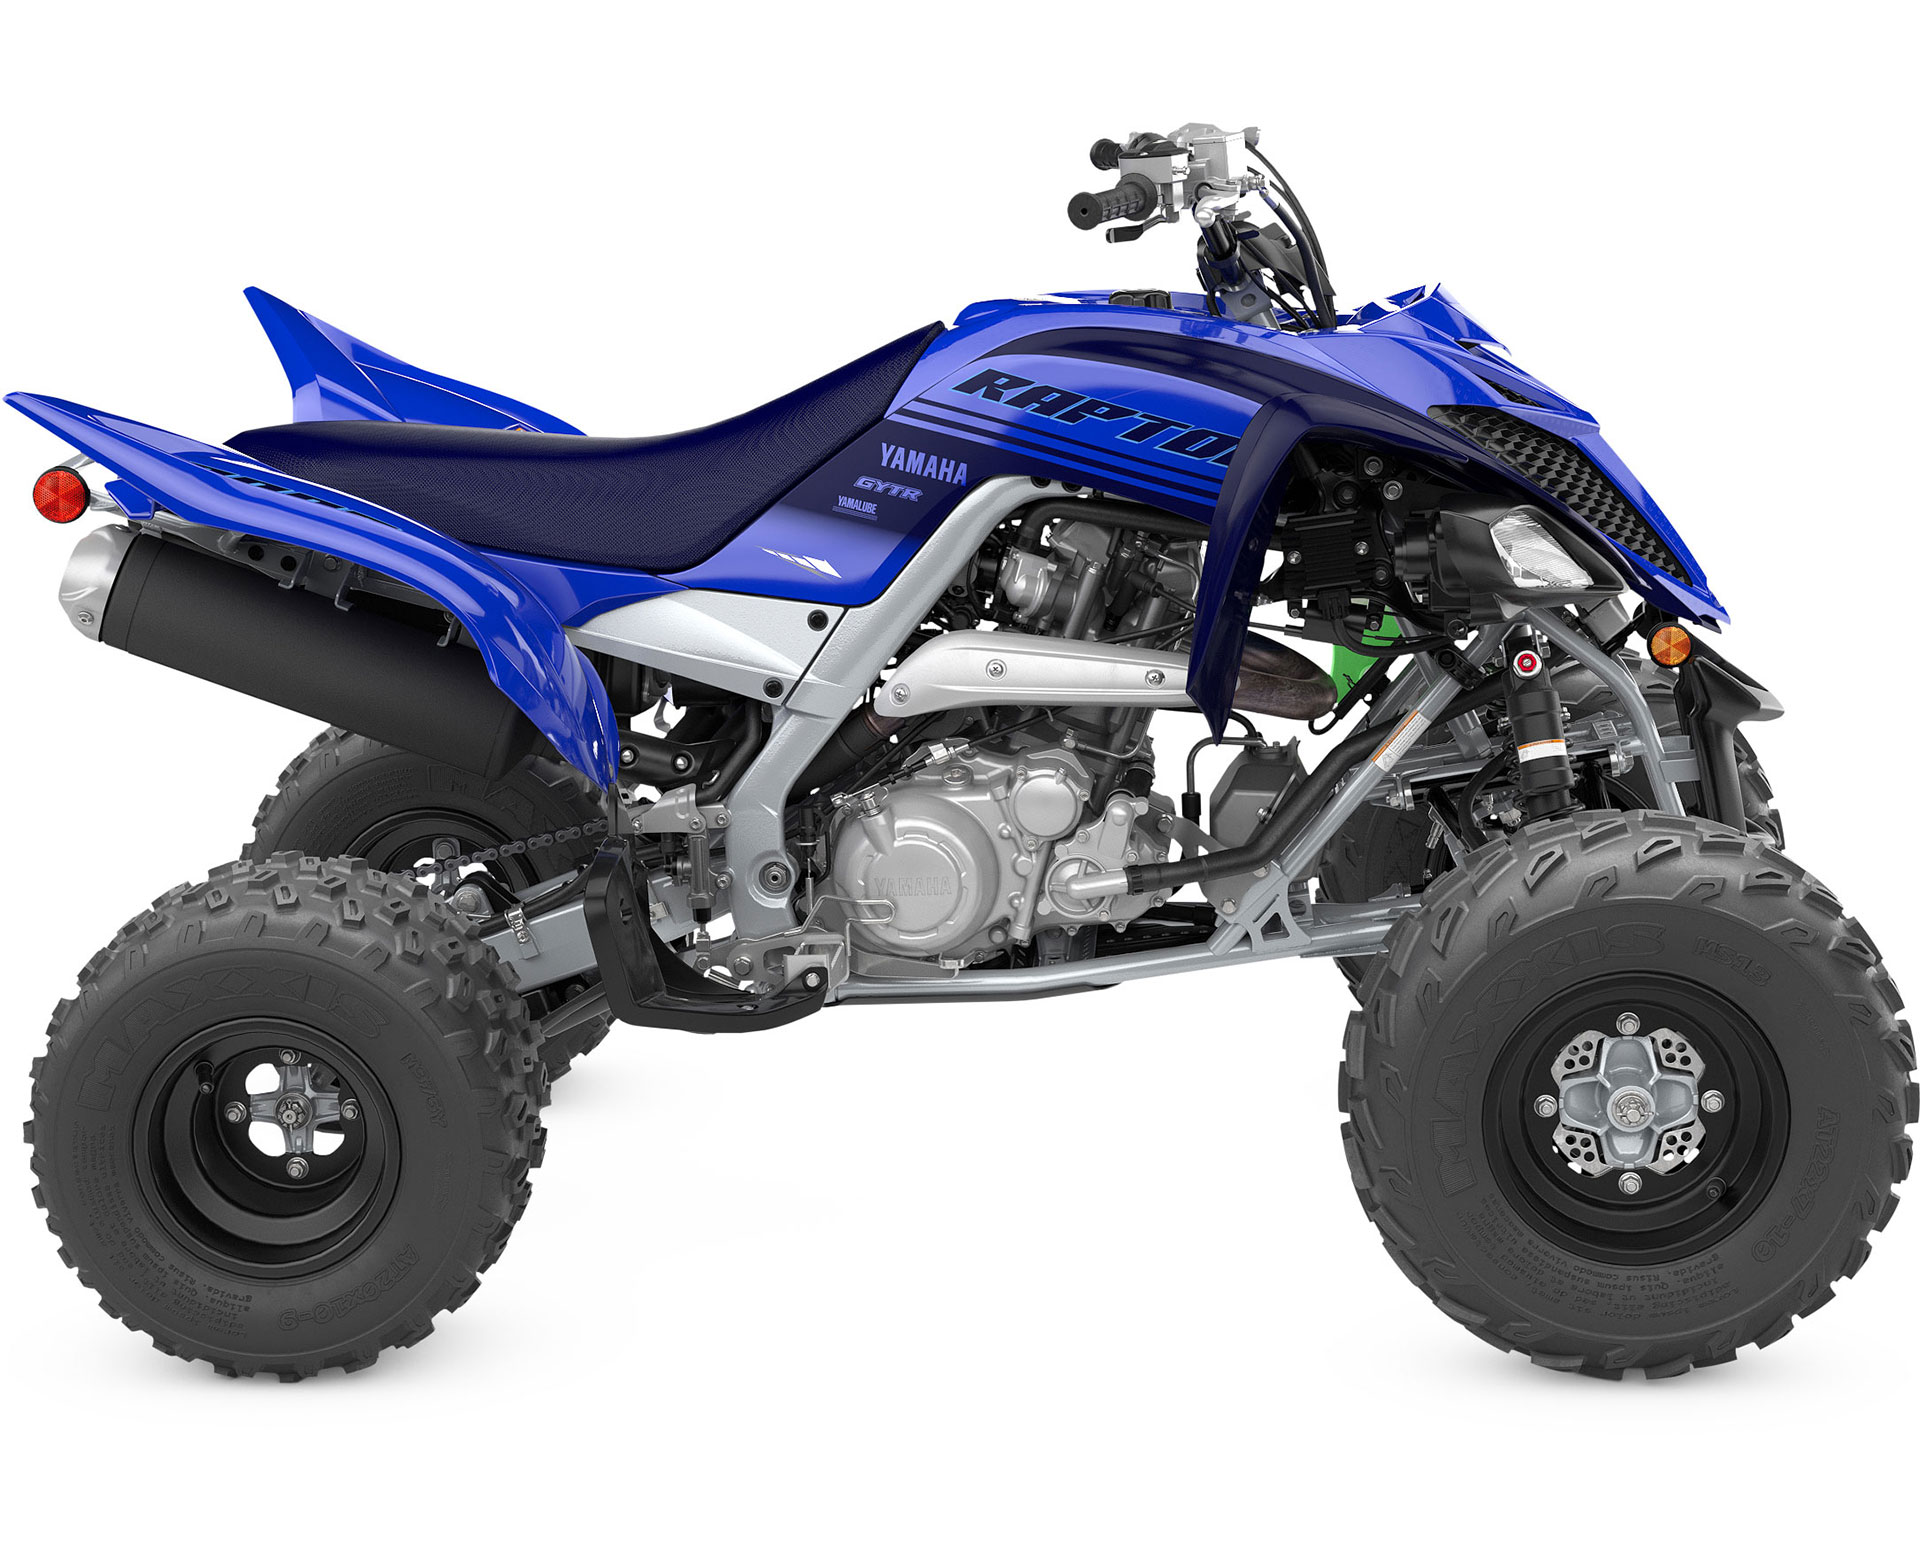 Thumbnail of your customized 2024 Raptor 700R